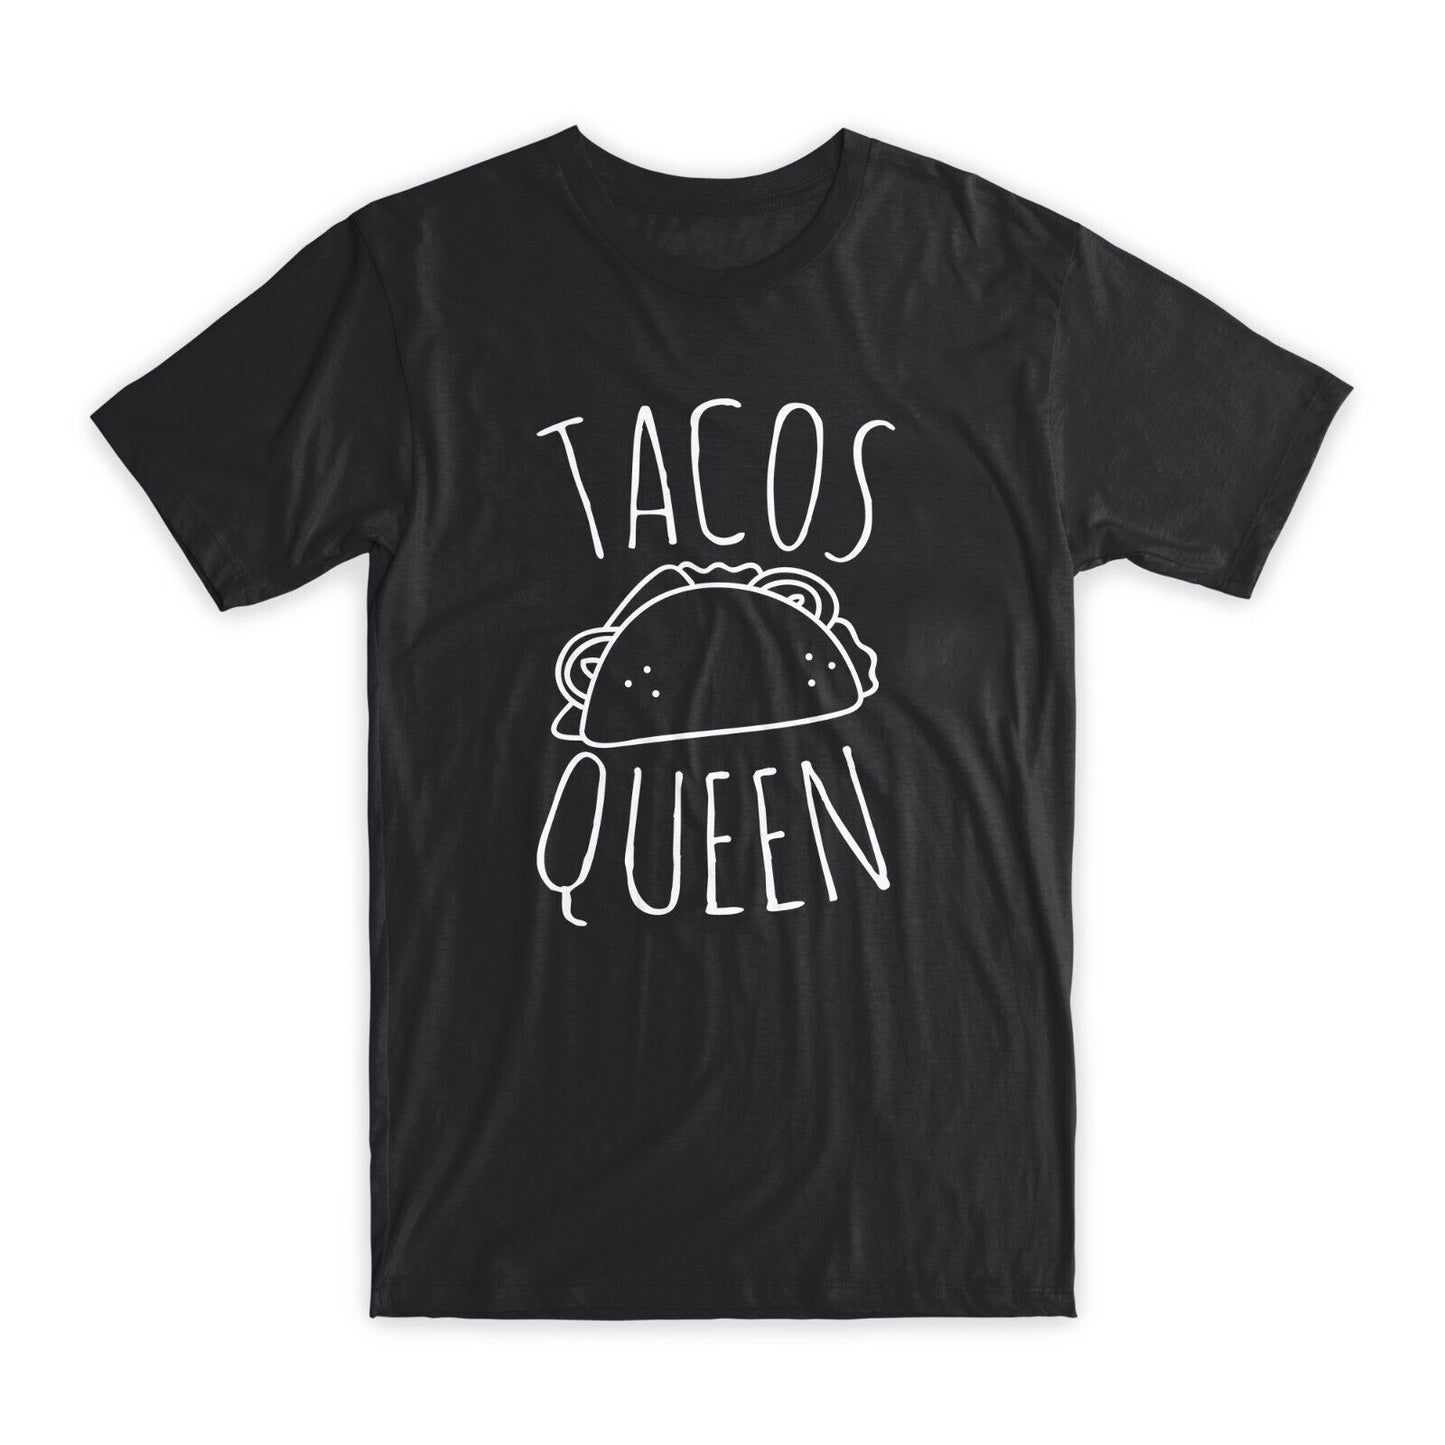 Tacos Queen T-Shirt Premium Soft Cotton Crew Neck Funny Tees Novelty Gifts NEW